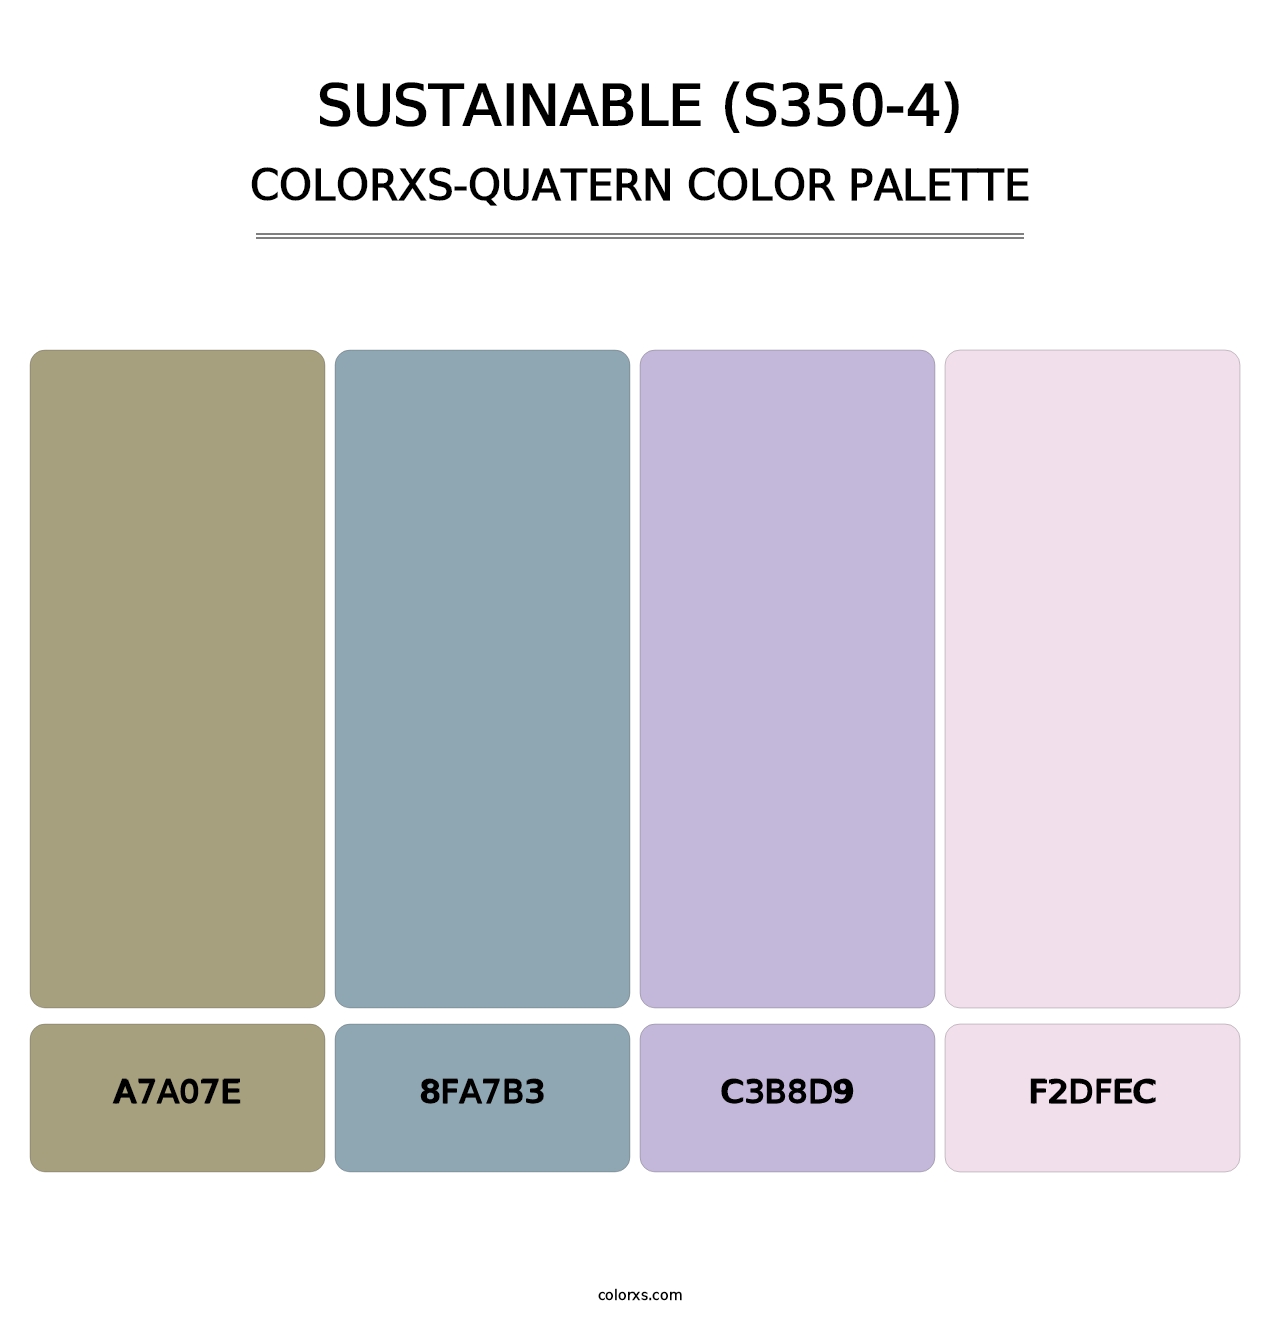 Sustainable (S350-4) - Colorxs Quatern Palette